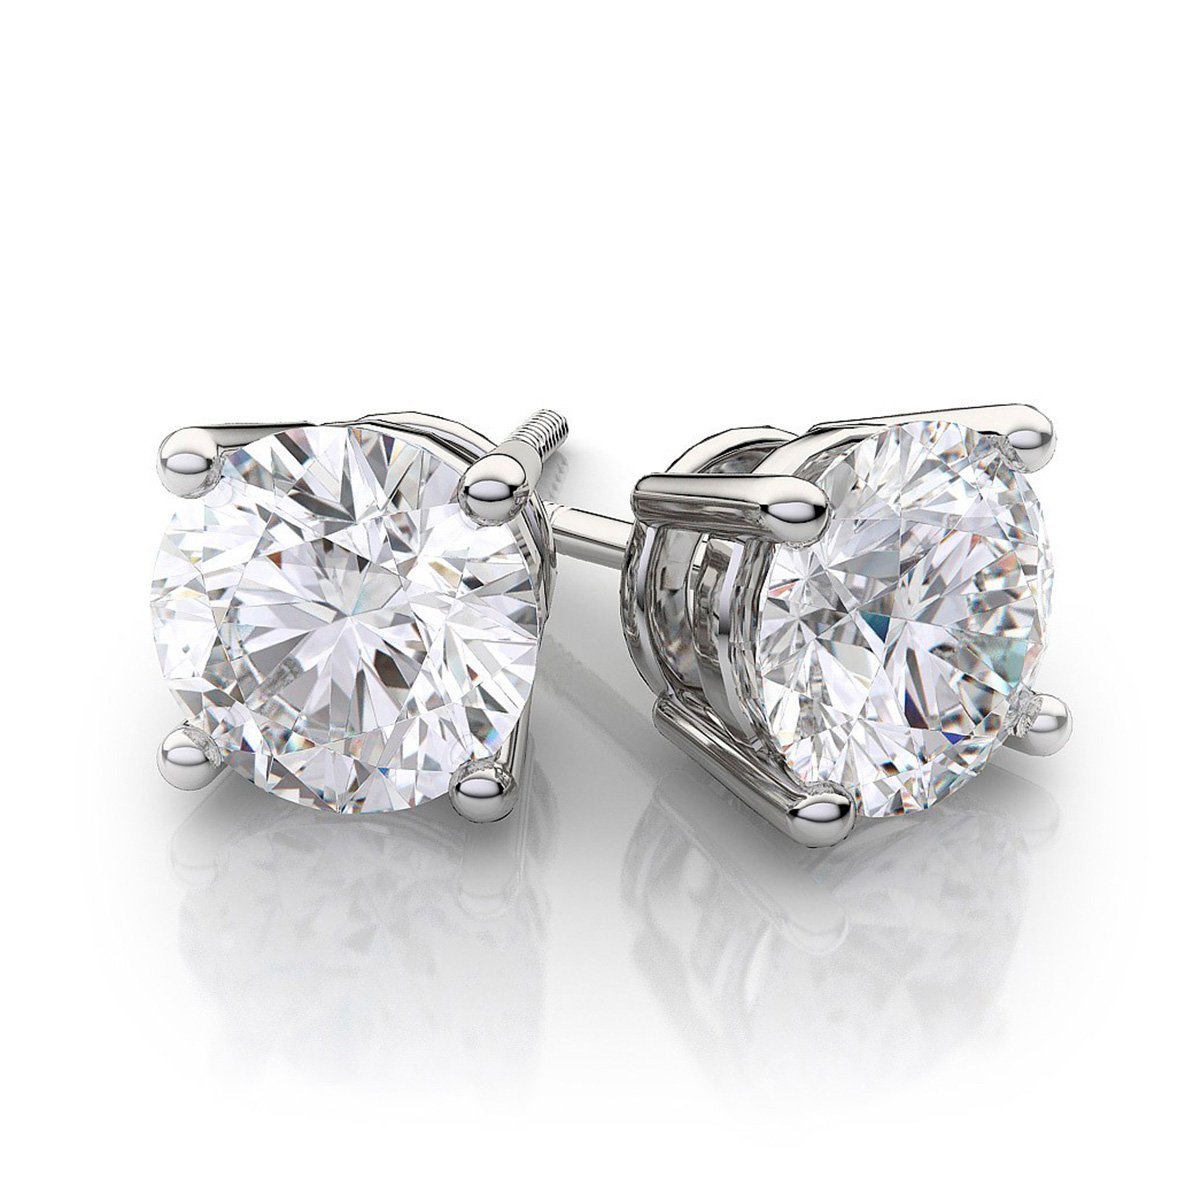 Round Solitaire Diamond Studs by Beauvince Jewelry